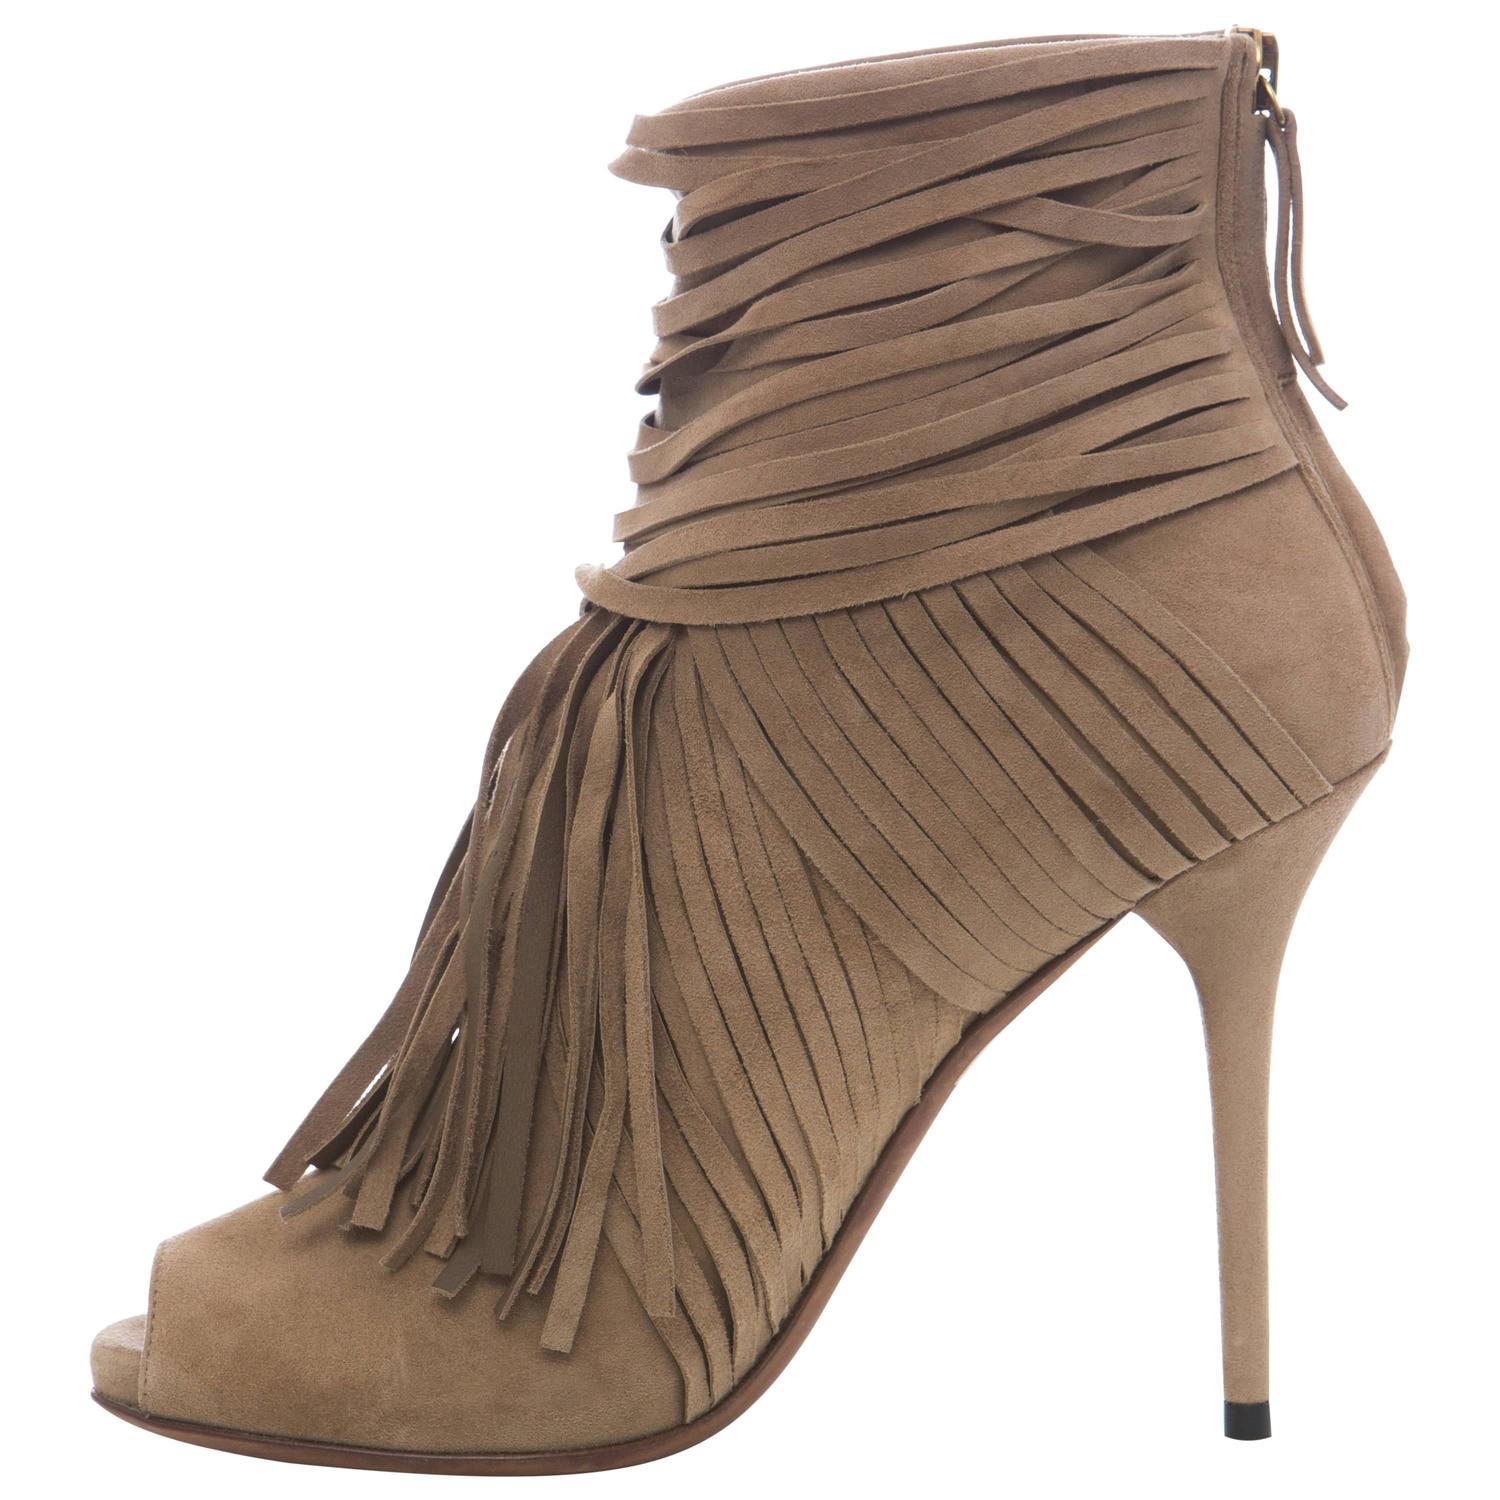 Gucci Suede Peep Toe Fringe Ankle Boots For Sale at 1stdibs